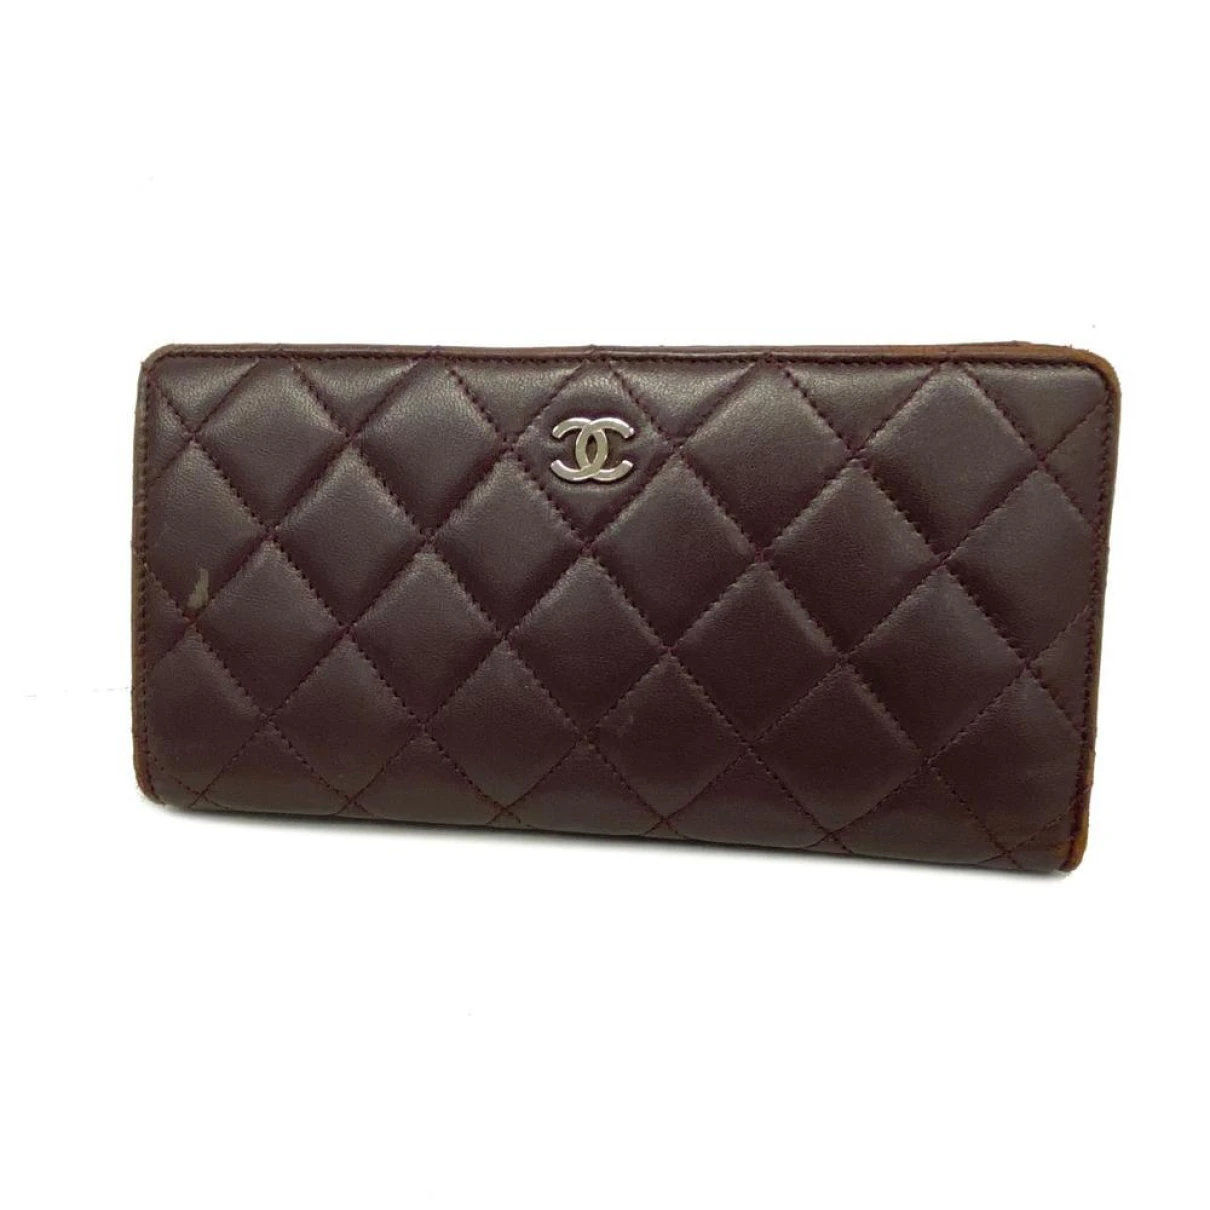 Pre-owned Chanel Leather Wallet In Burgundy